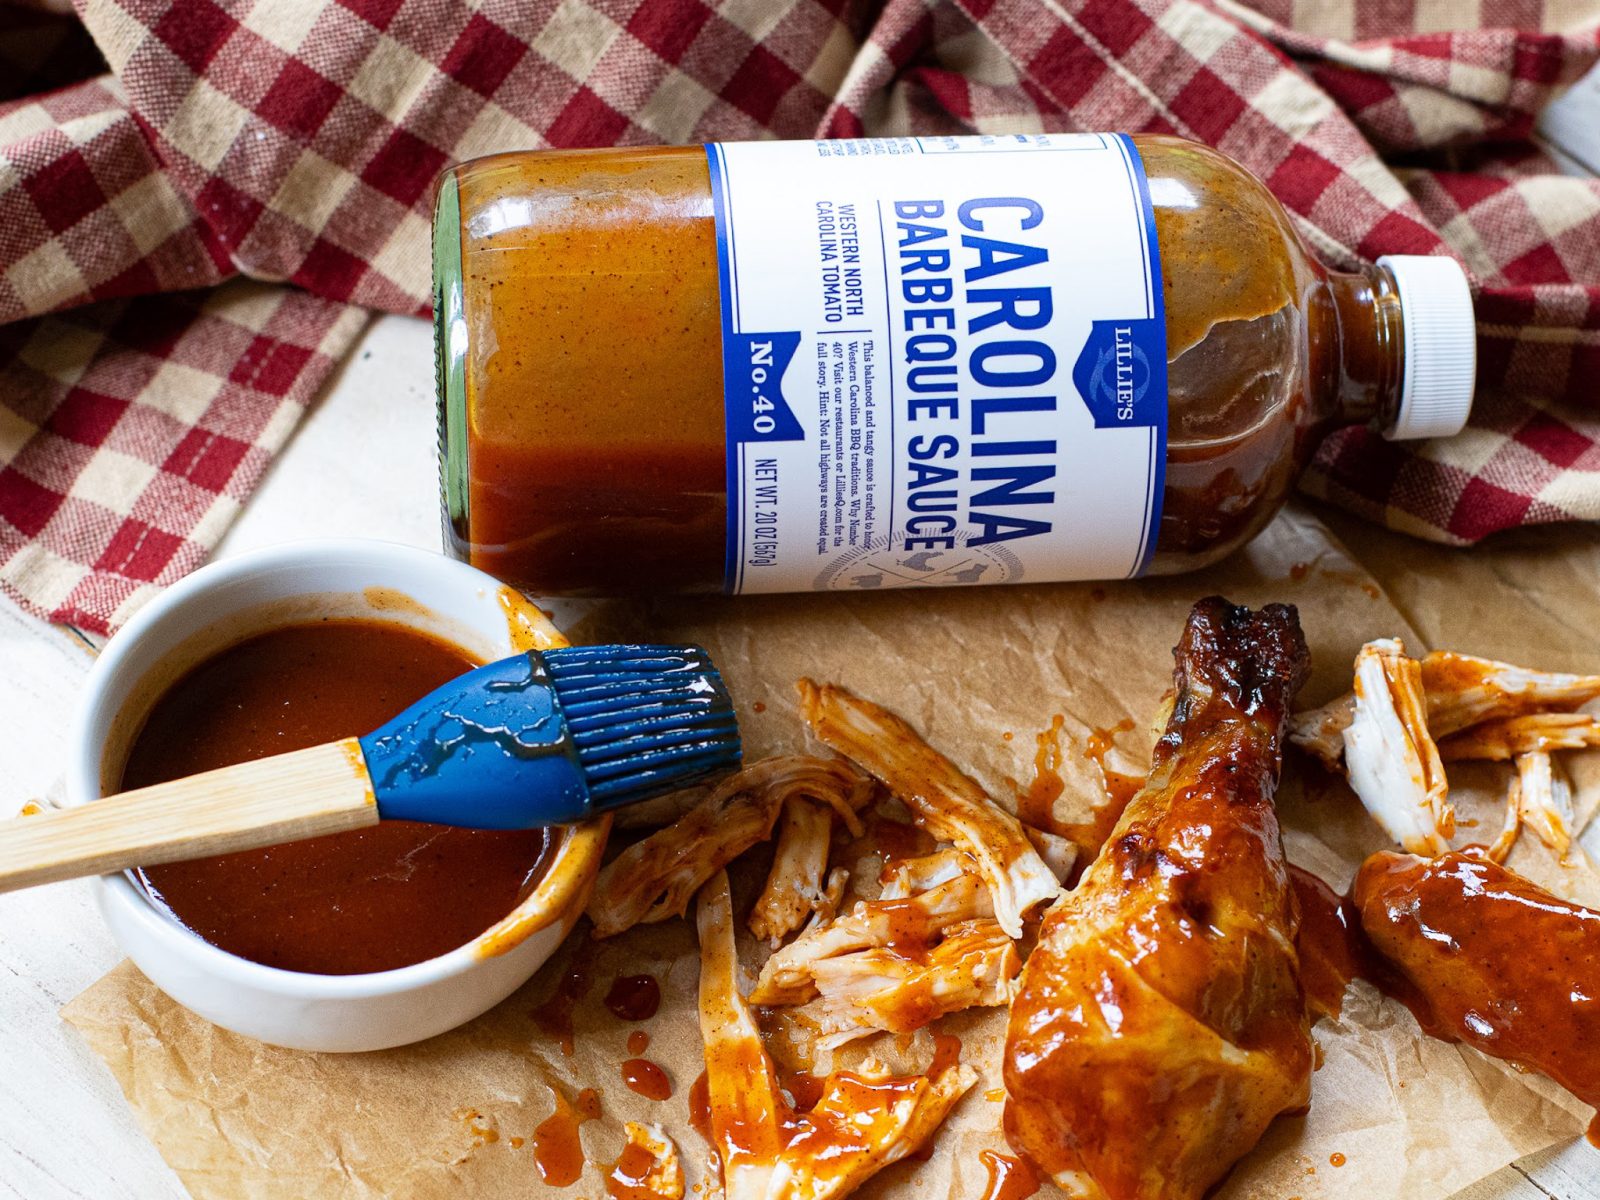 Lillie’s Q Barbeque Sauce Ibotta For The Kroger Sale – Save Over $2